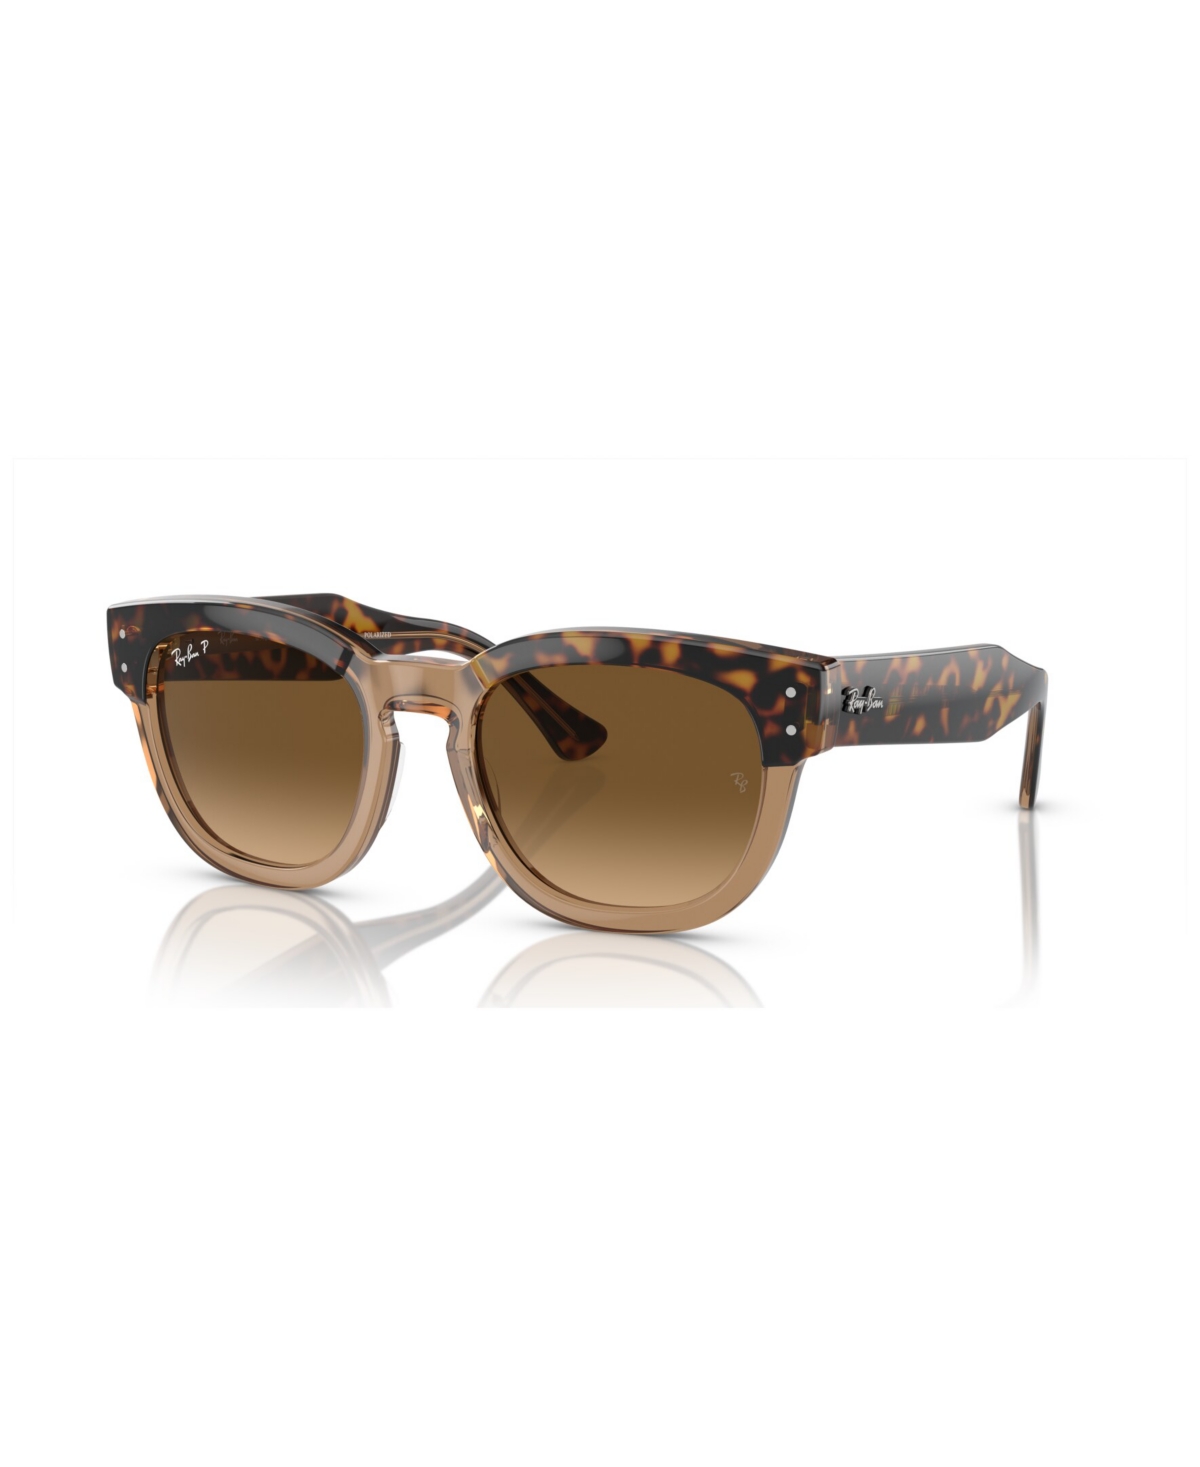 Ray Ban Mega Hawkeye Polarized Sunglasses, Gradient Rb0298s, Exclusively Ours In Havana On Transparent Brown